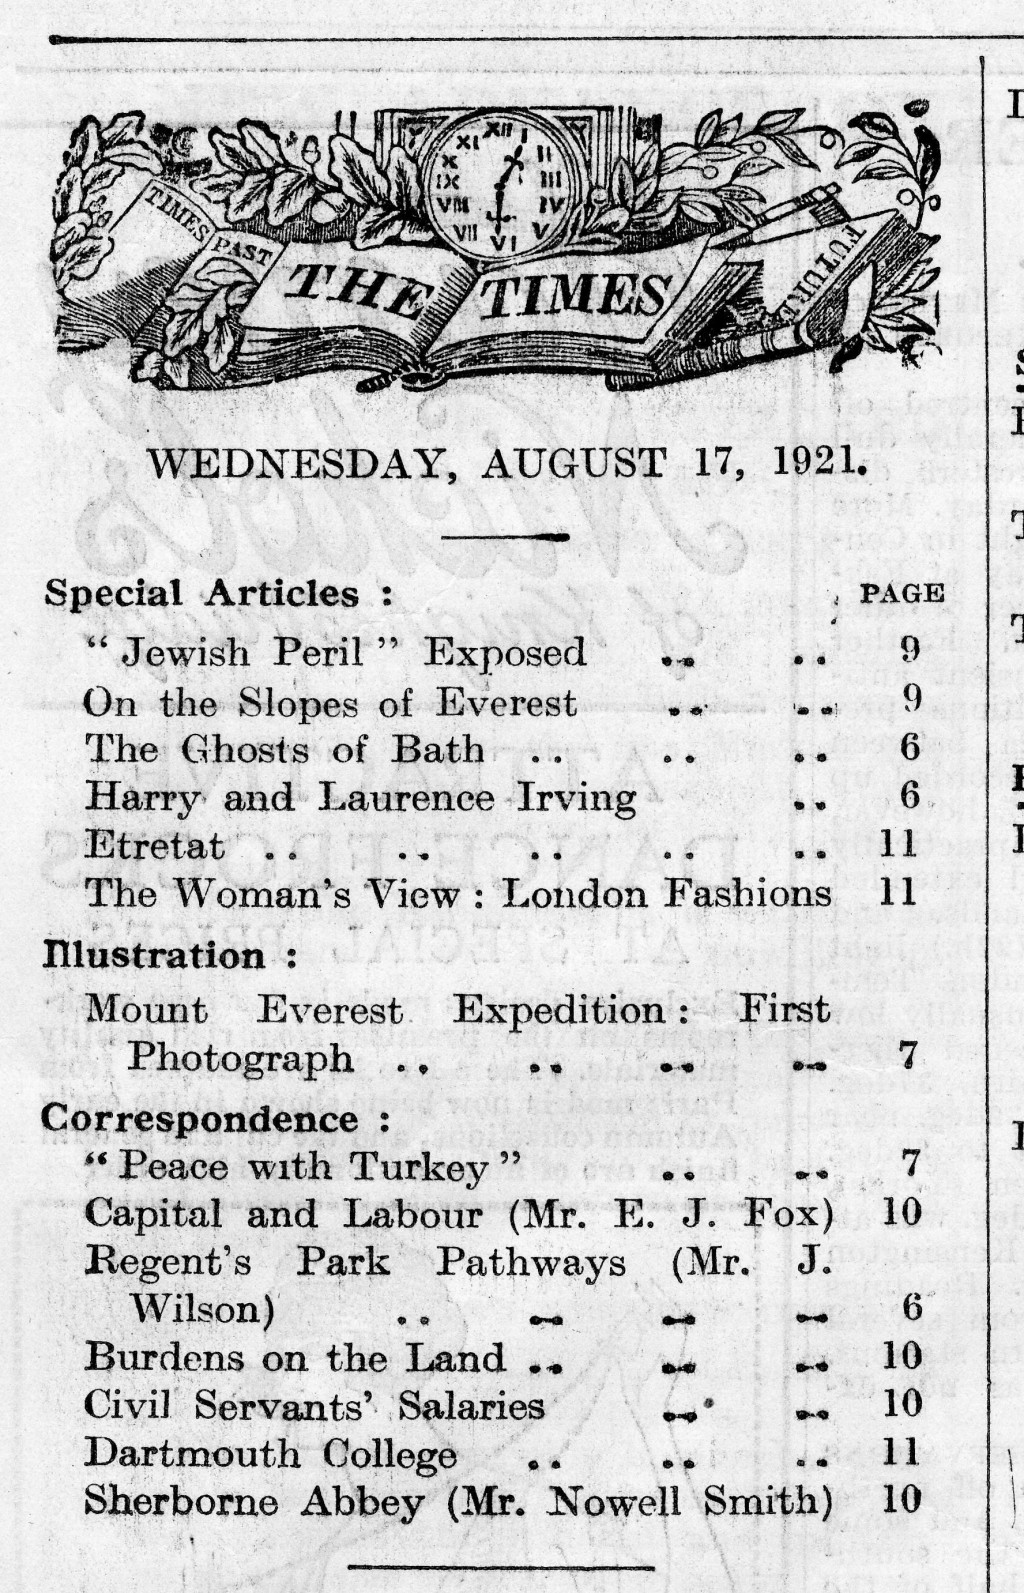 The Times, August 17, 1921 [LCID: 2006ukyb]